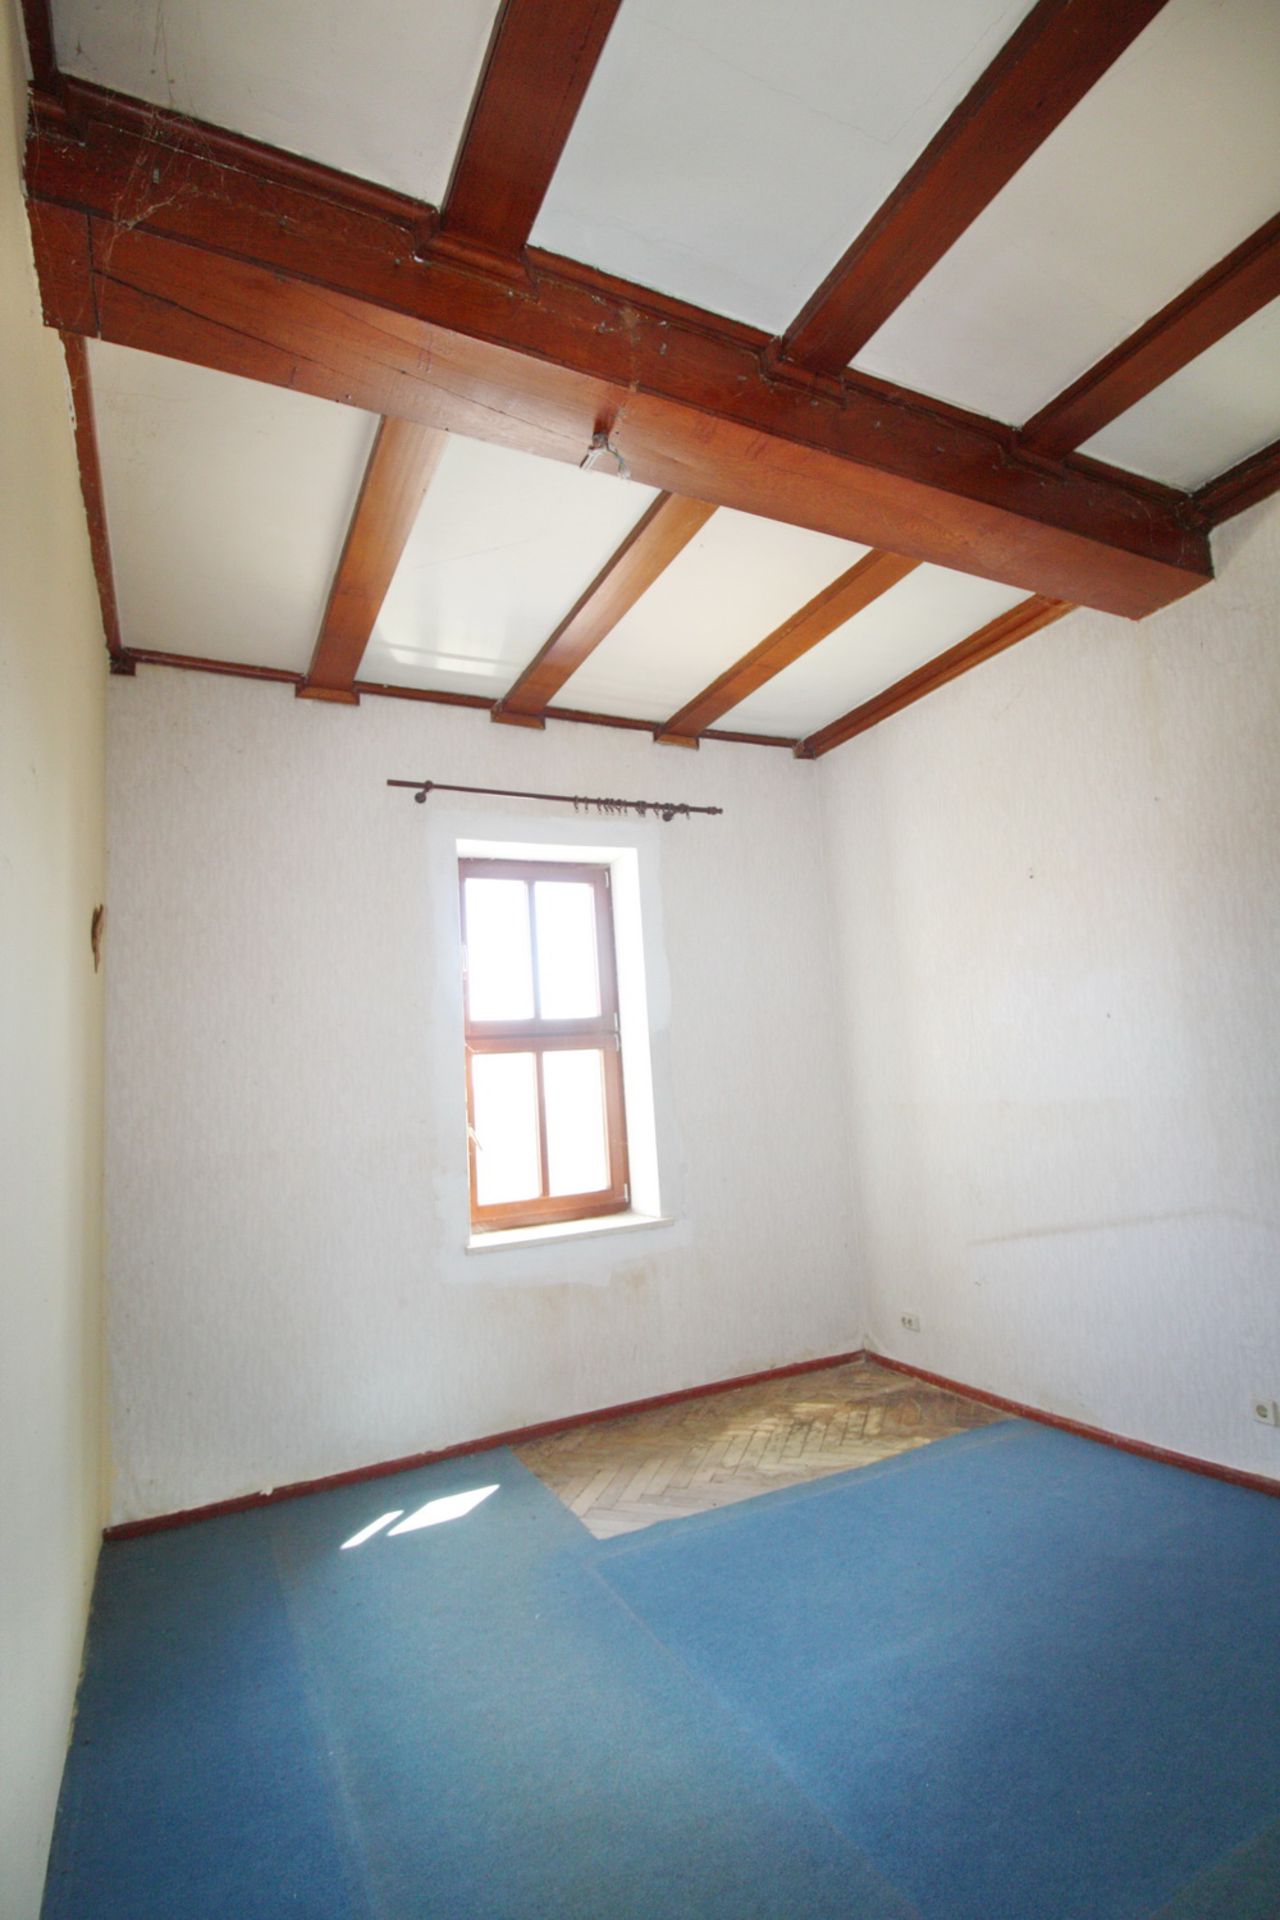 LARGE HOUSING BLOCK HORNSOMMEM, GERMANY READY TO MOVE INTO FREEHOLD VACANT POSSESSION - Image 34 of 91